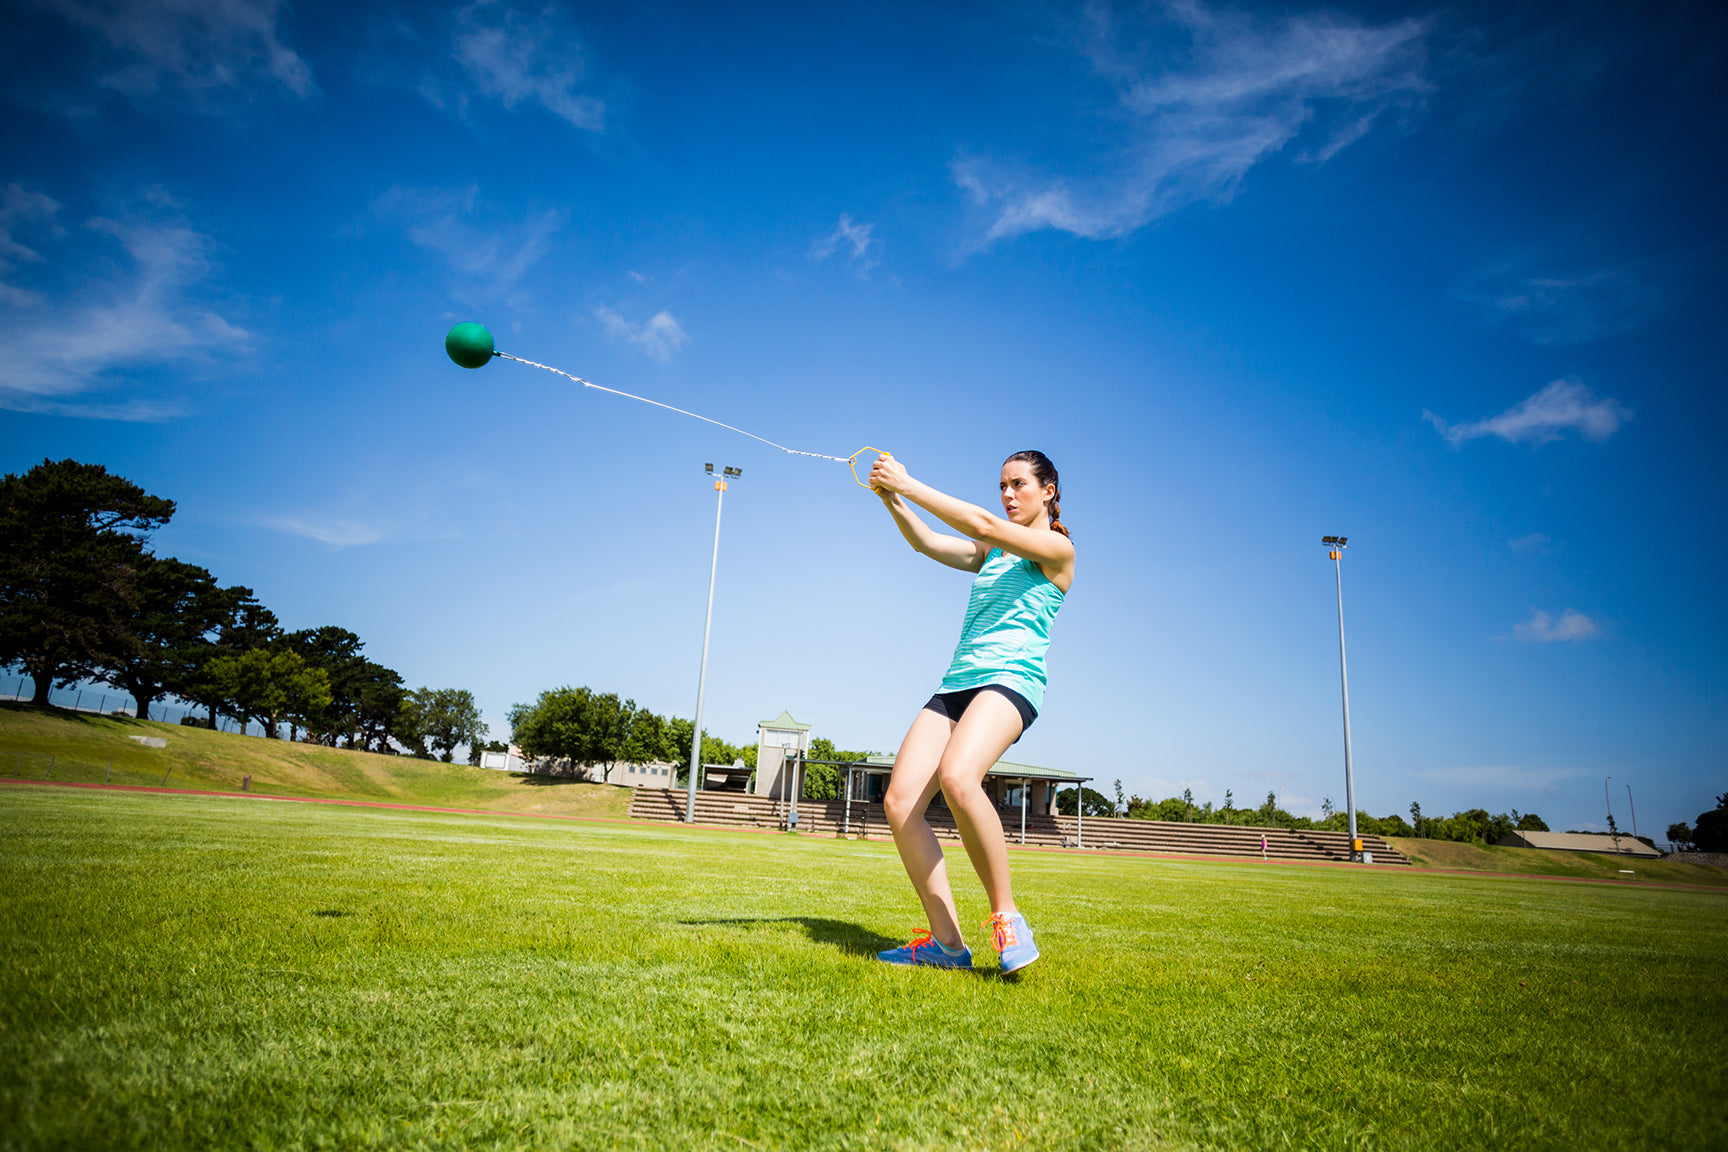 Female athlete throwing the hammer